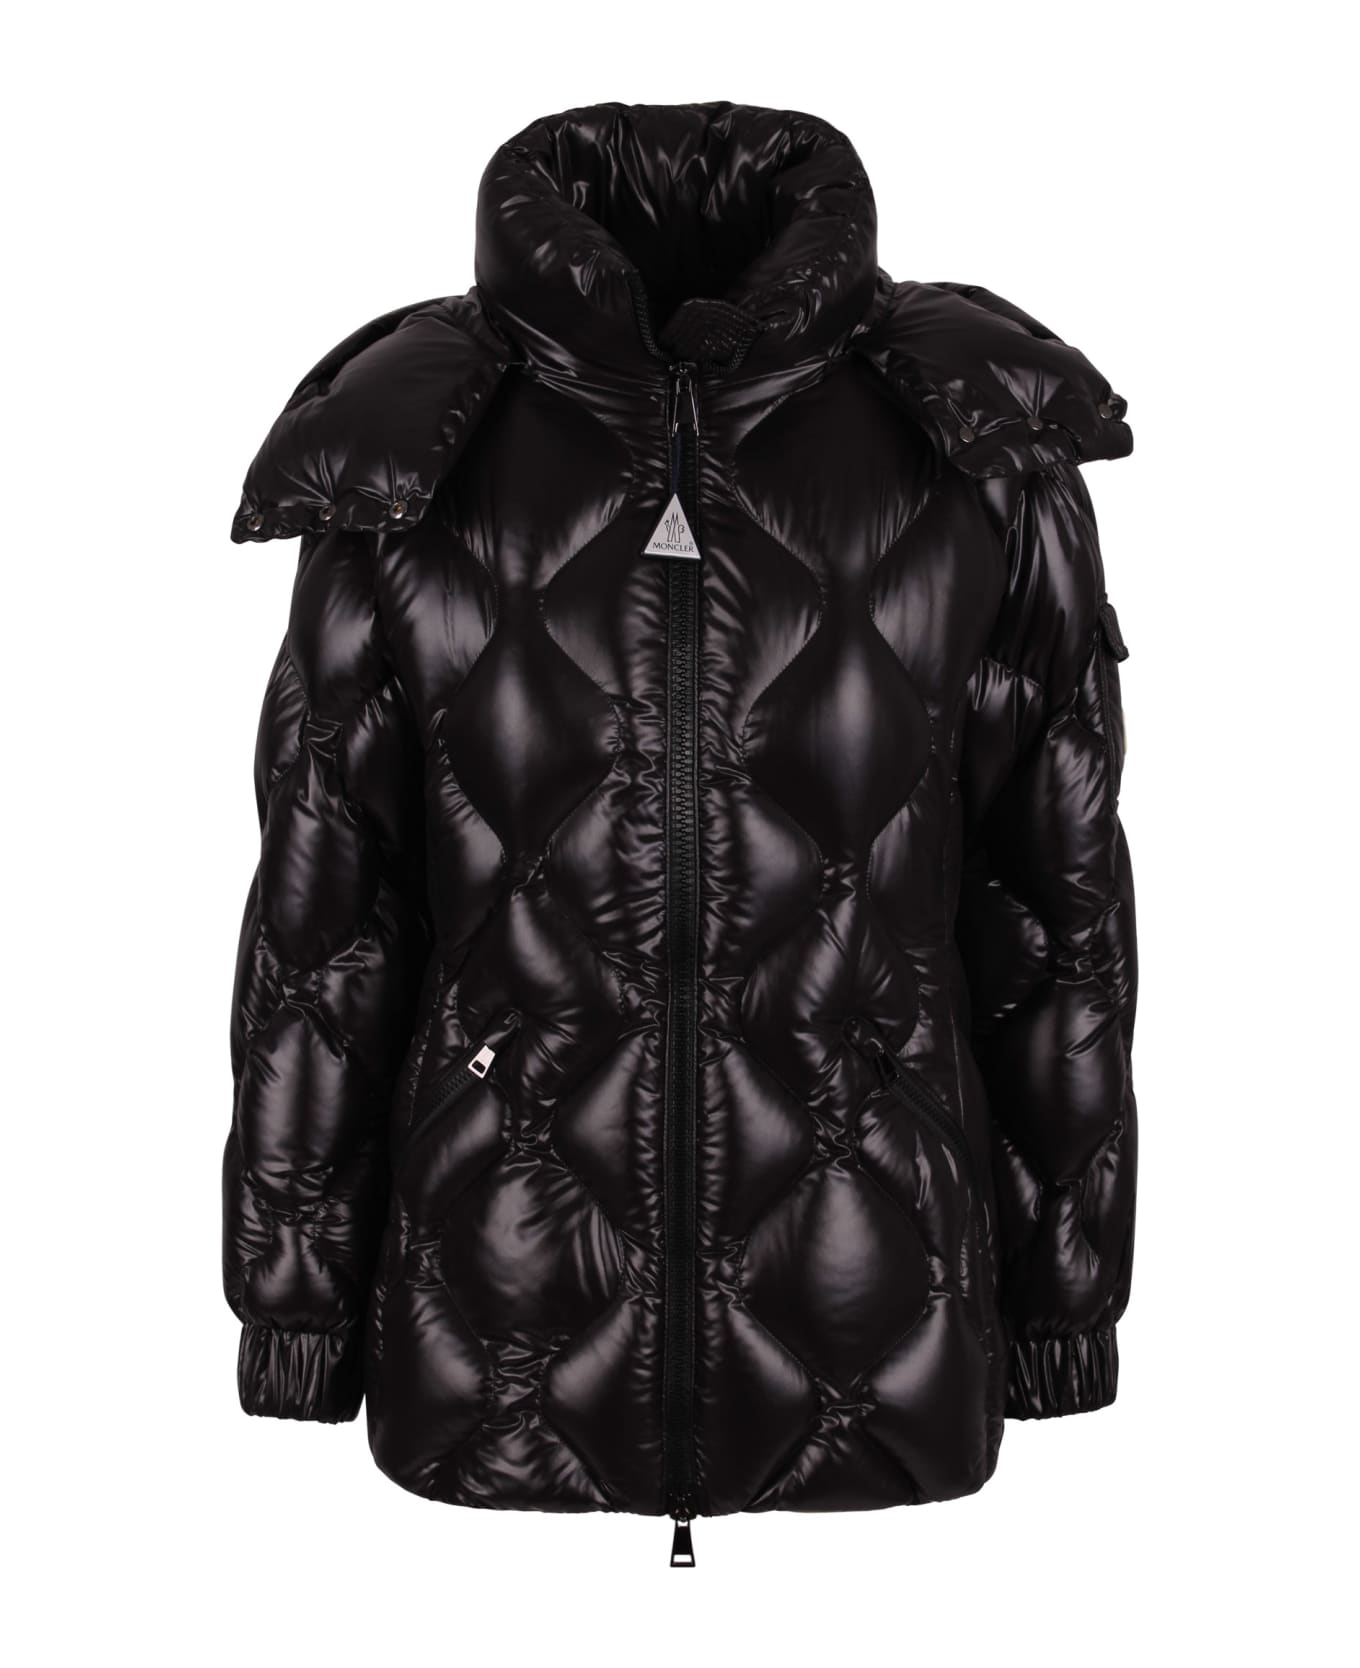 Moncler 'fioget' High Collar Down Jacket | italist